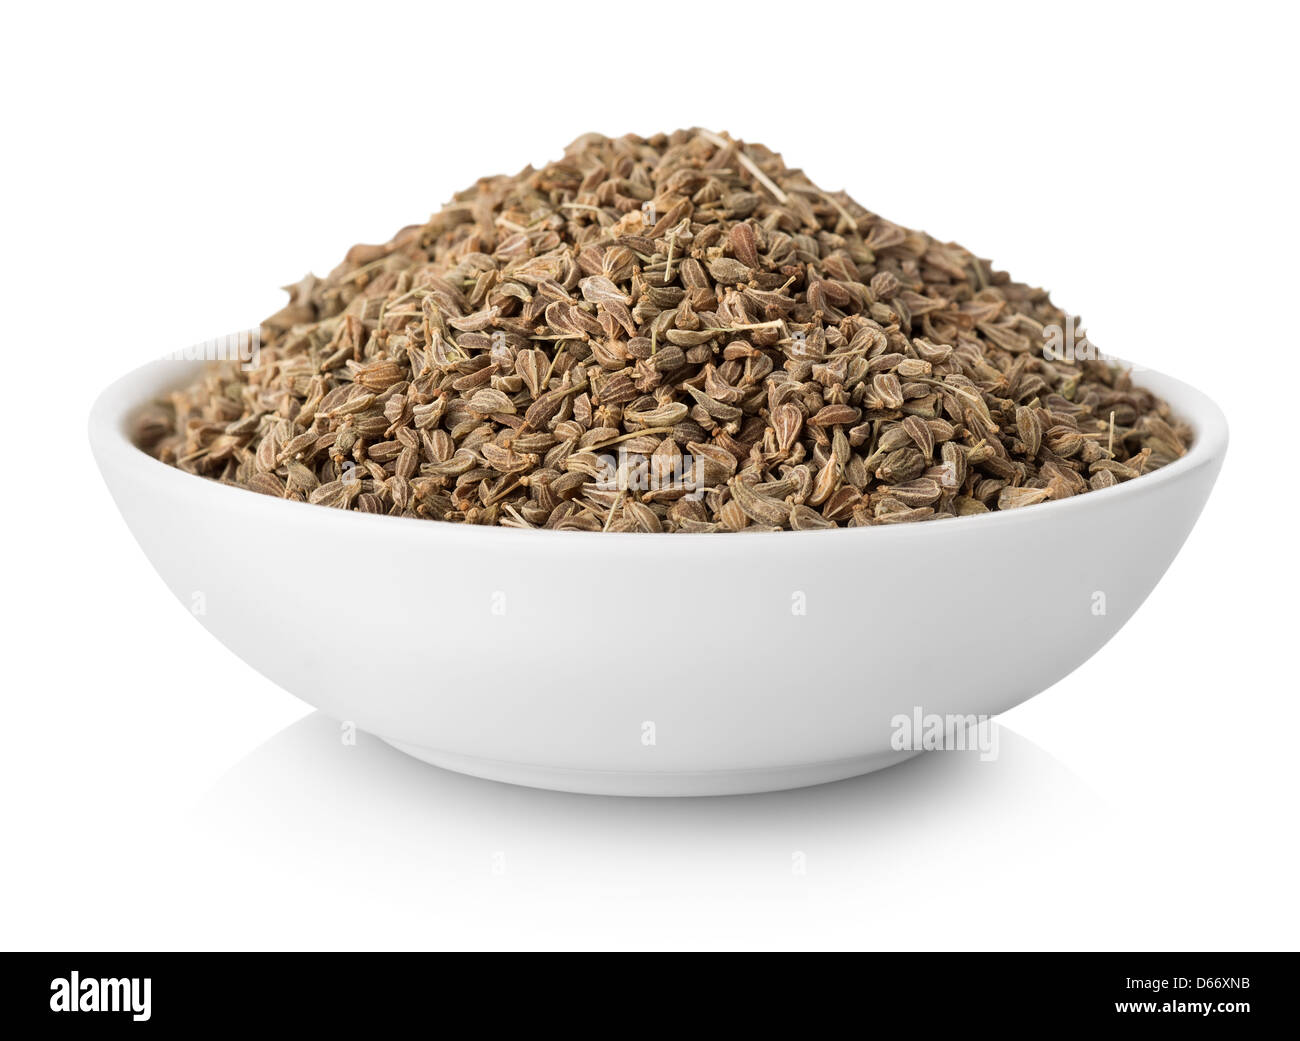 Anise seeds in plate isolated on white background Stock Photo